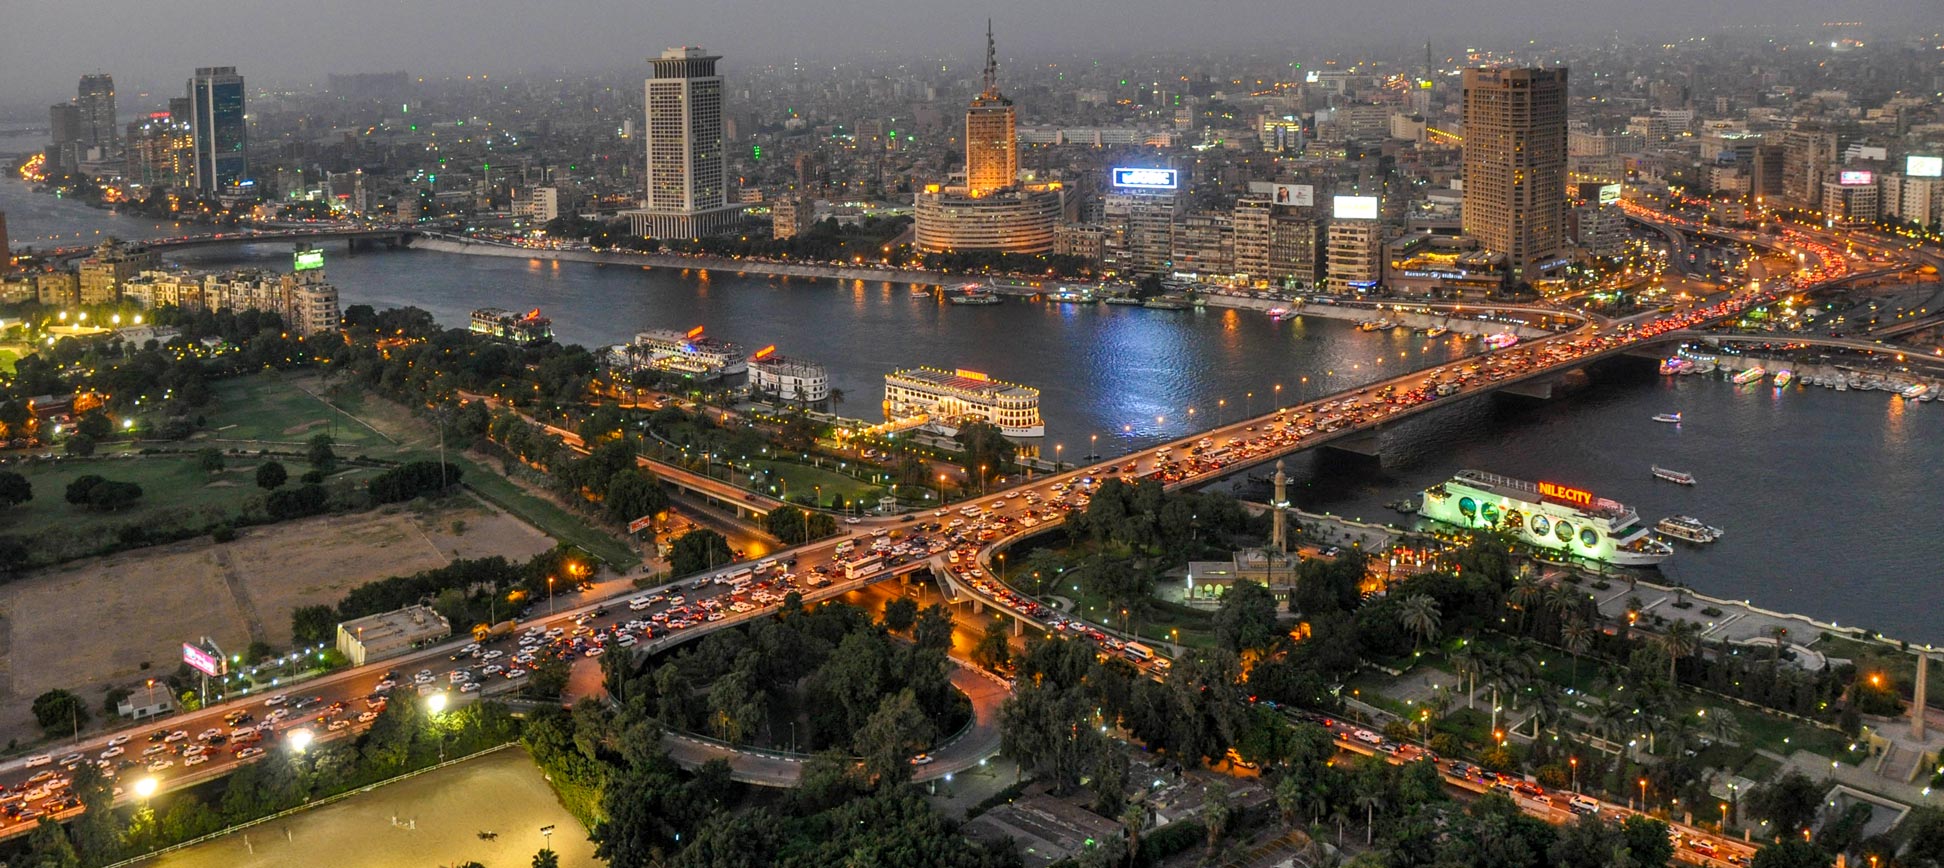 Egypt: One of the most developed countries in Africa